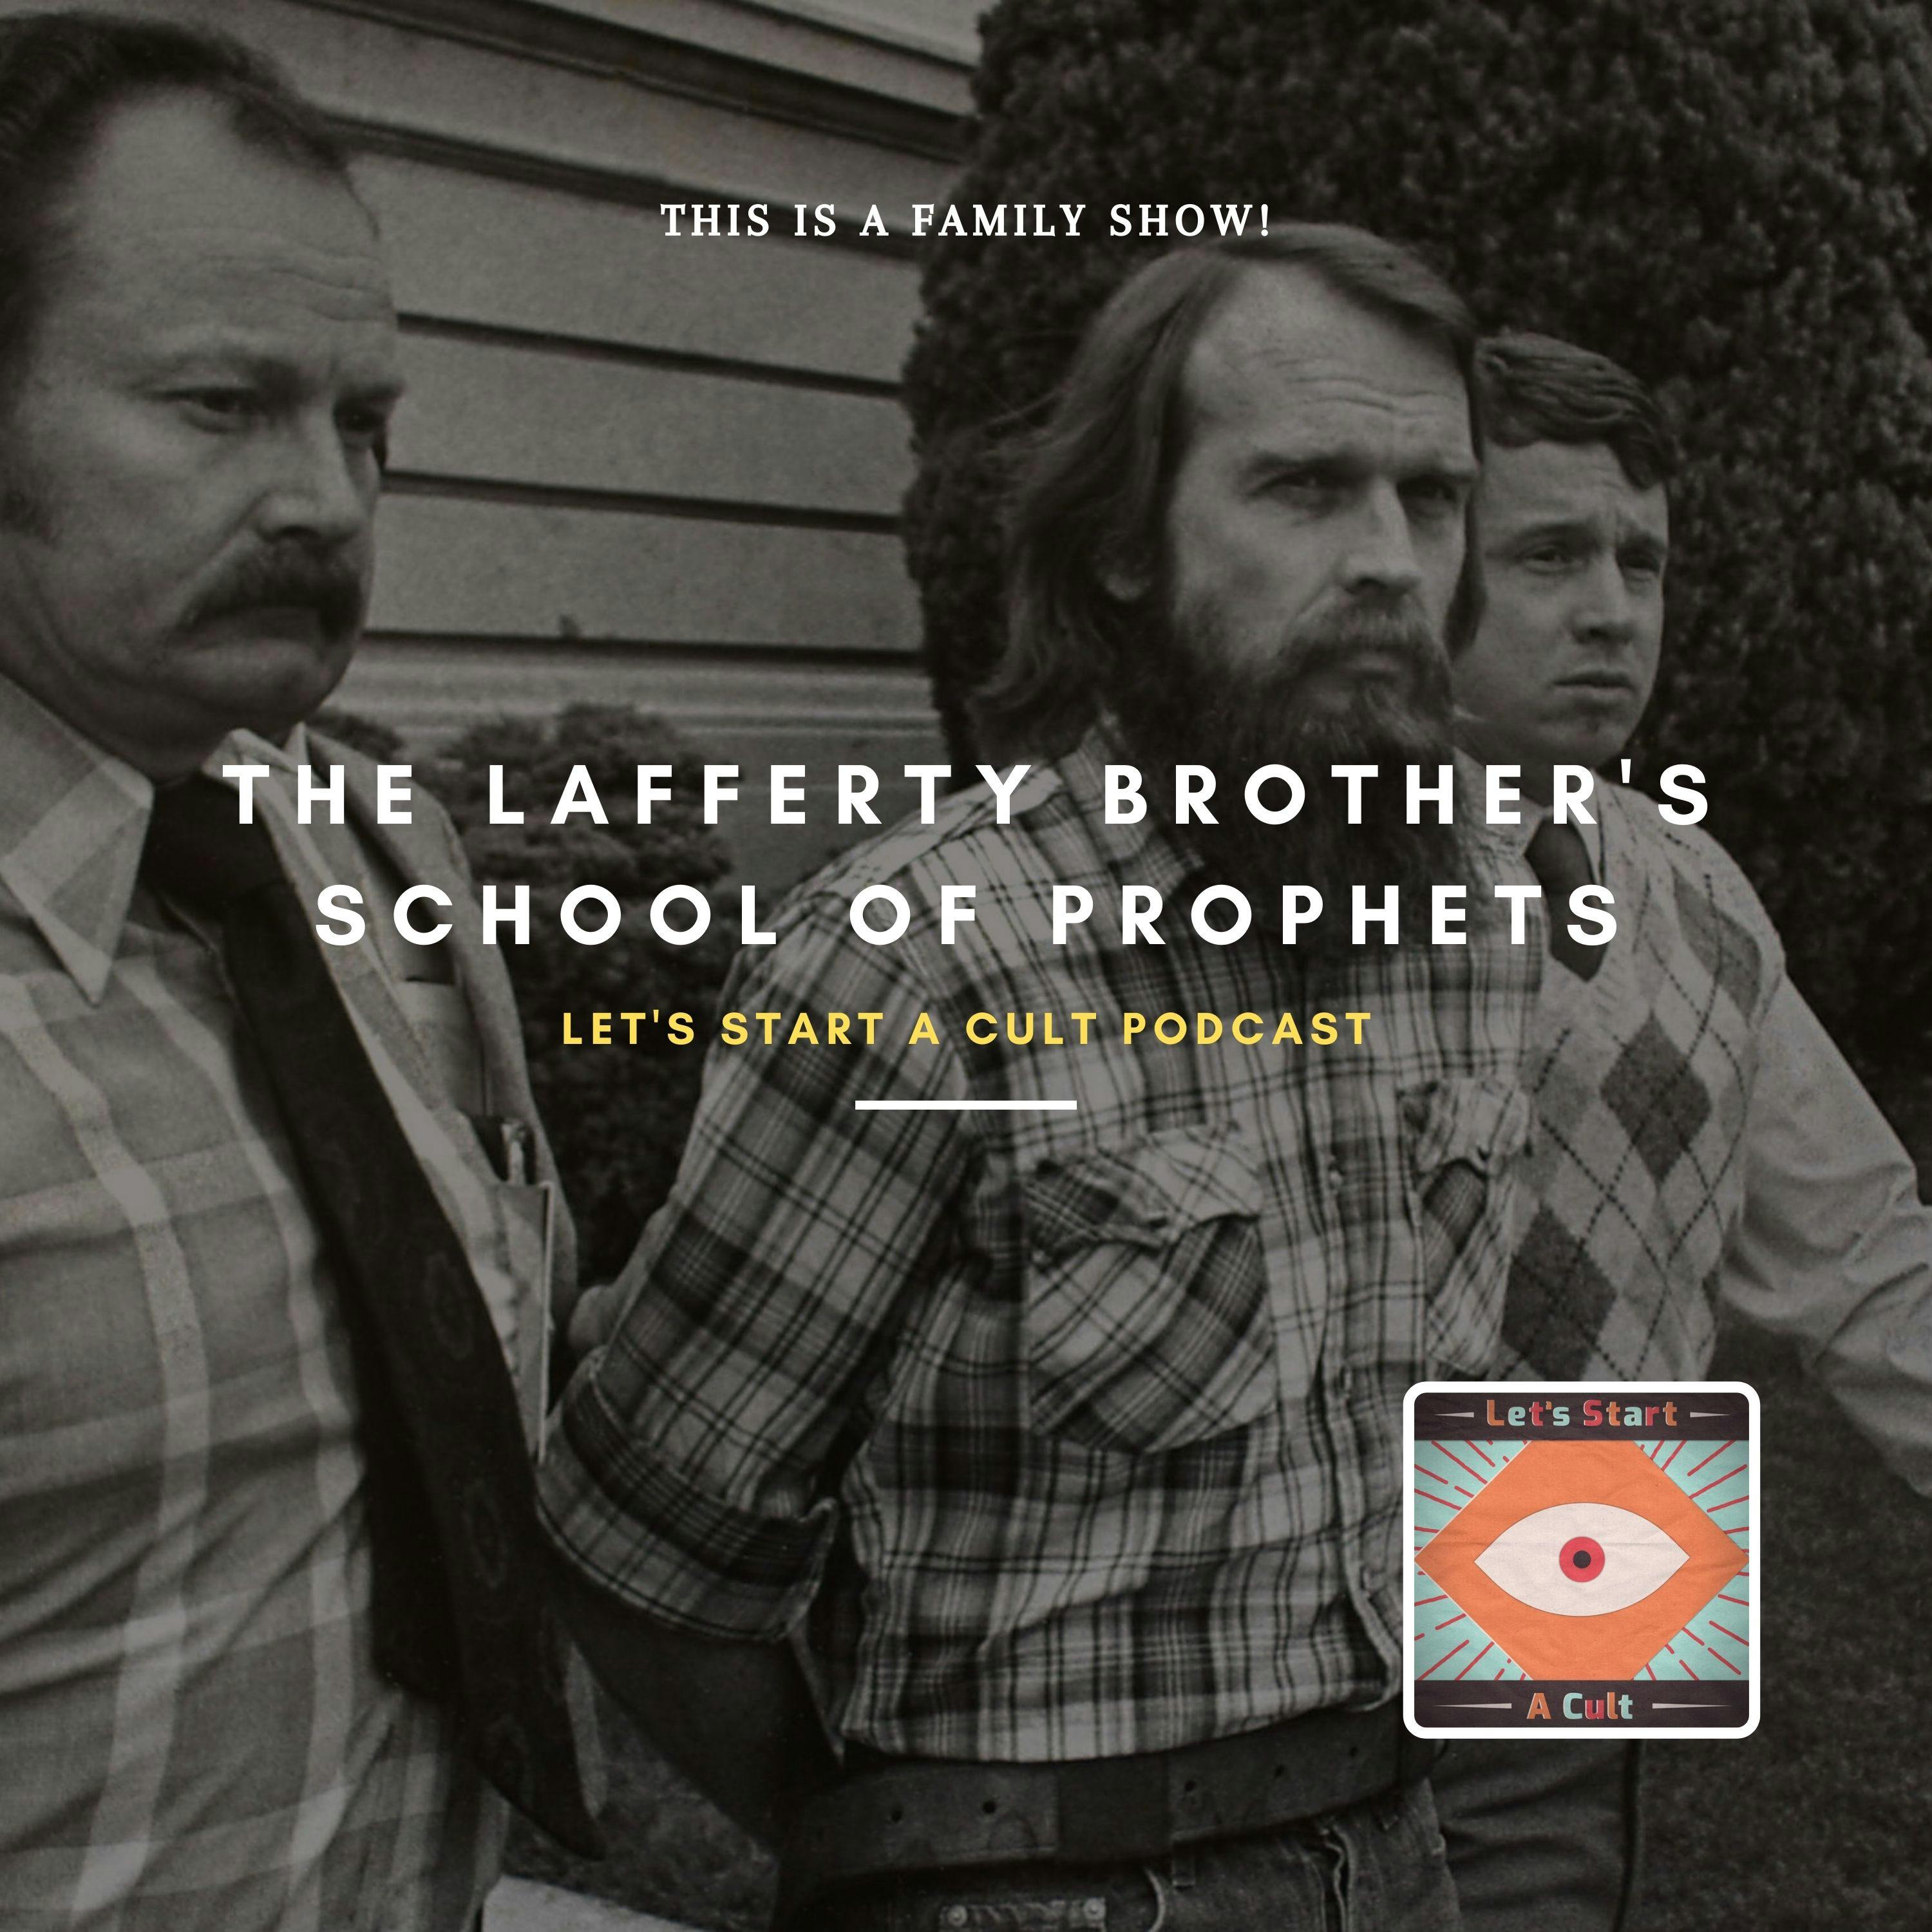 The Lafferty Brothers’ School of Prophets | A Family Cult